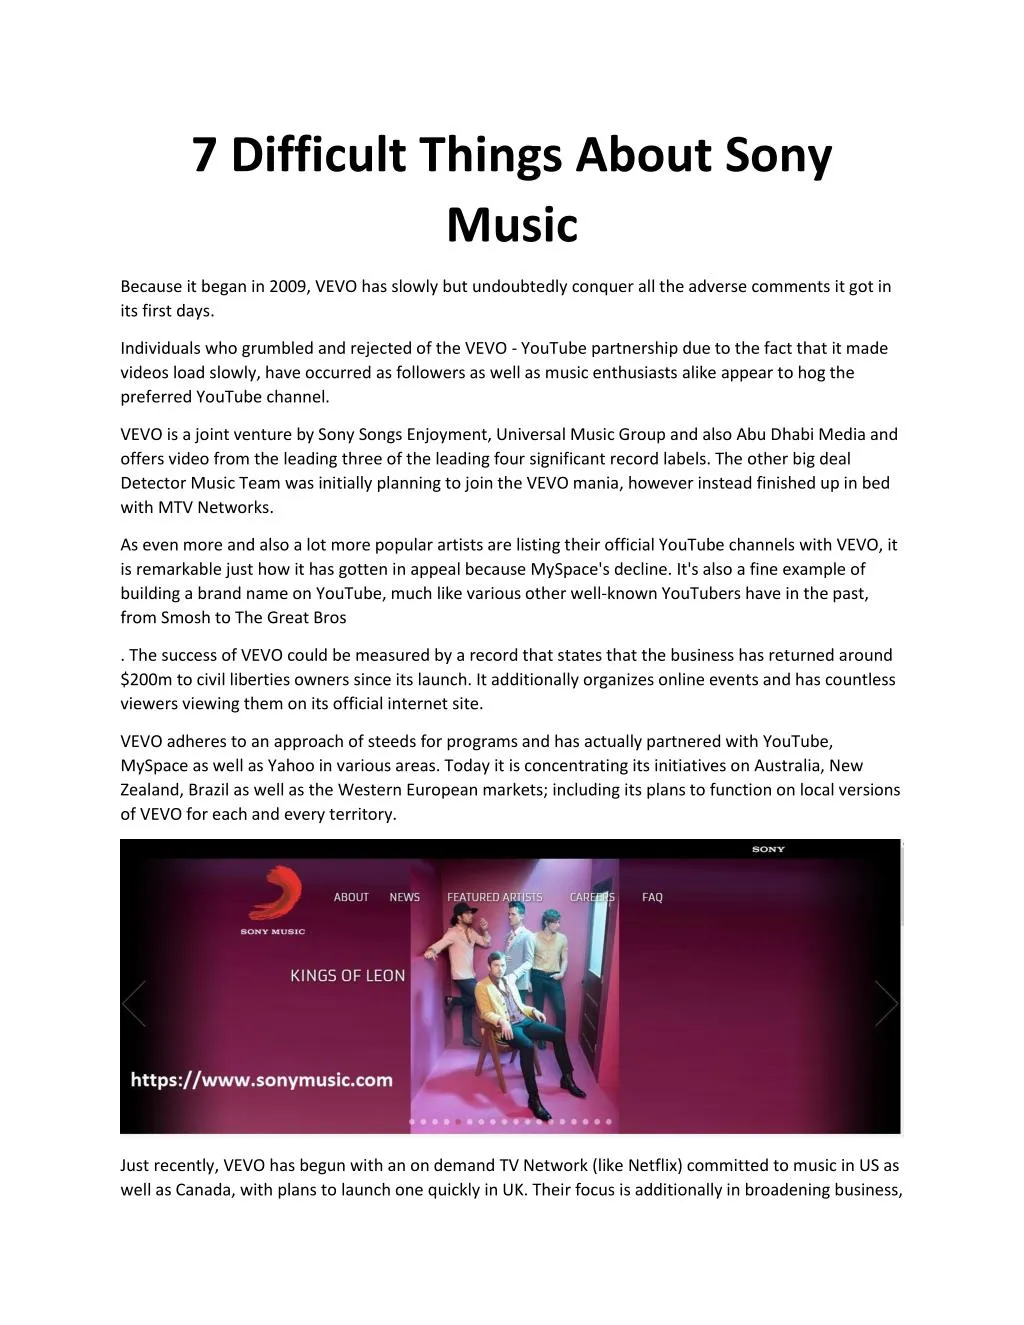 7 difficult things about sony music